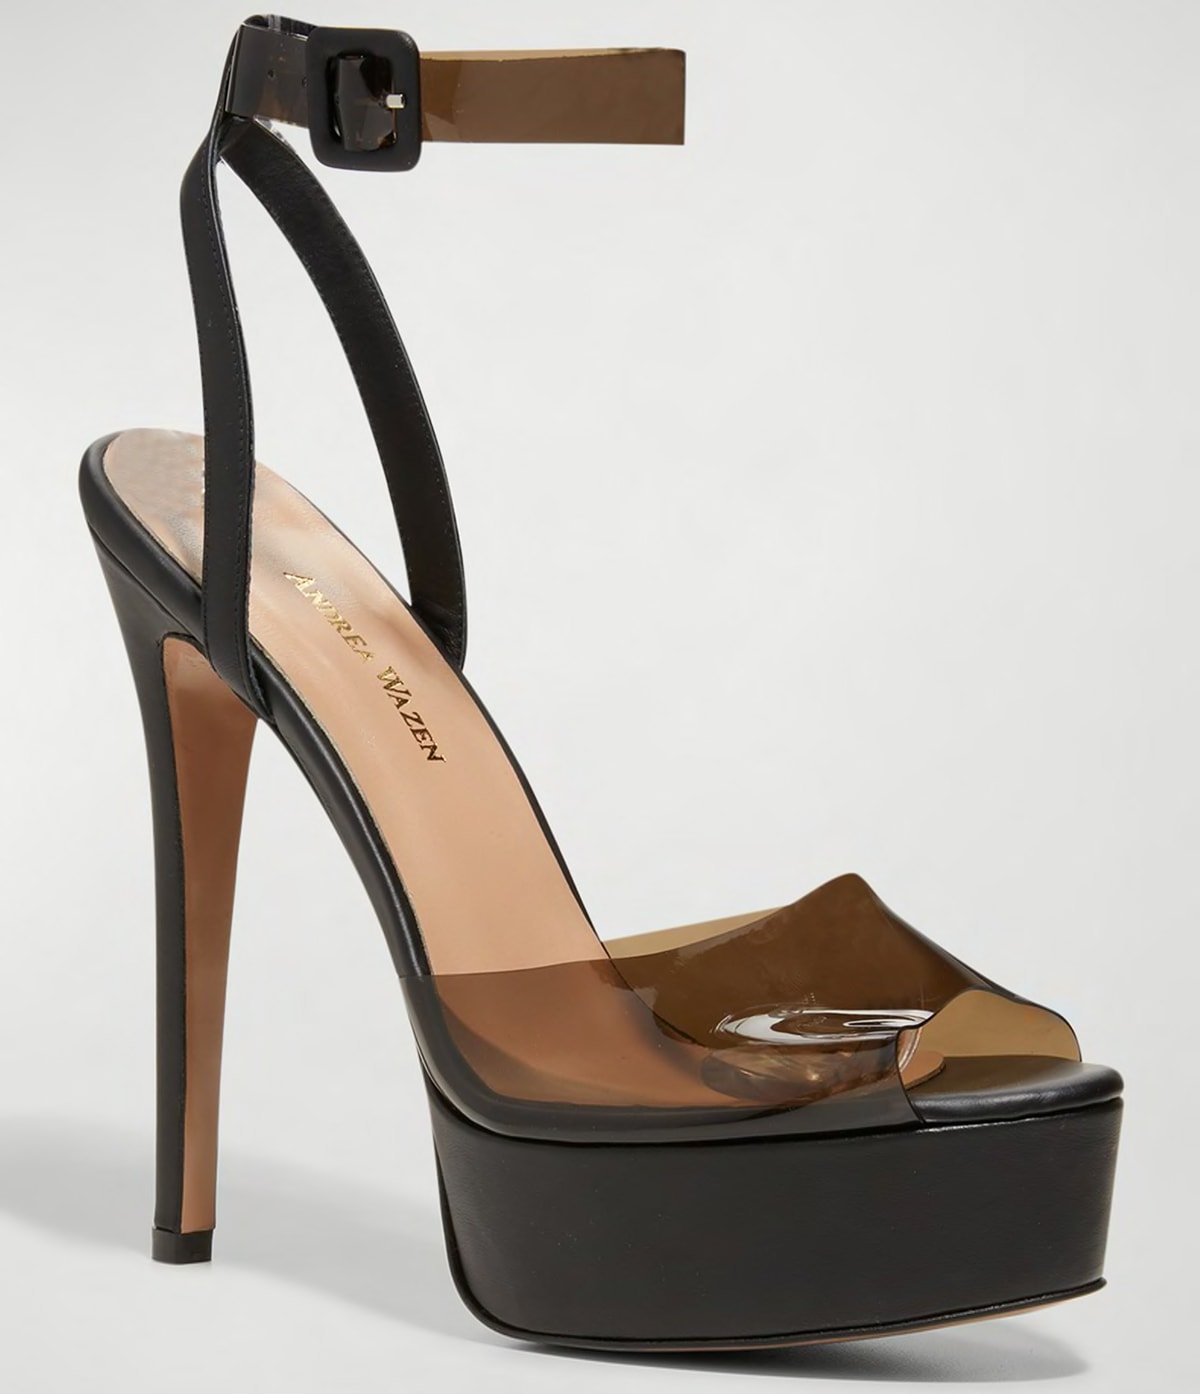 The Andrea Wazen Antigone sandals have clear peep-toe vamp straps and ankle straps set atop 6-inch heels